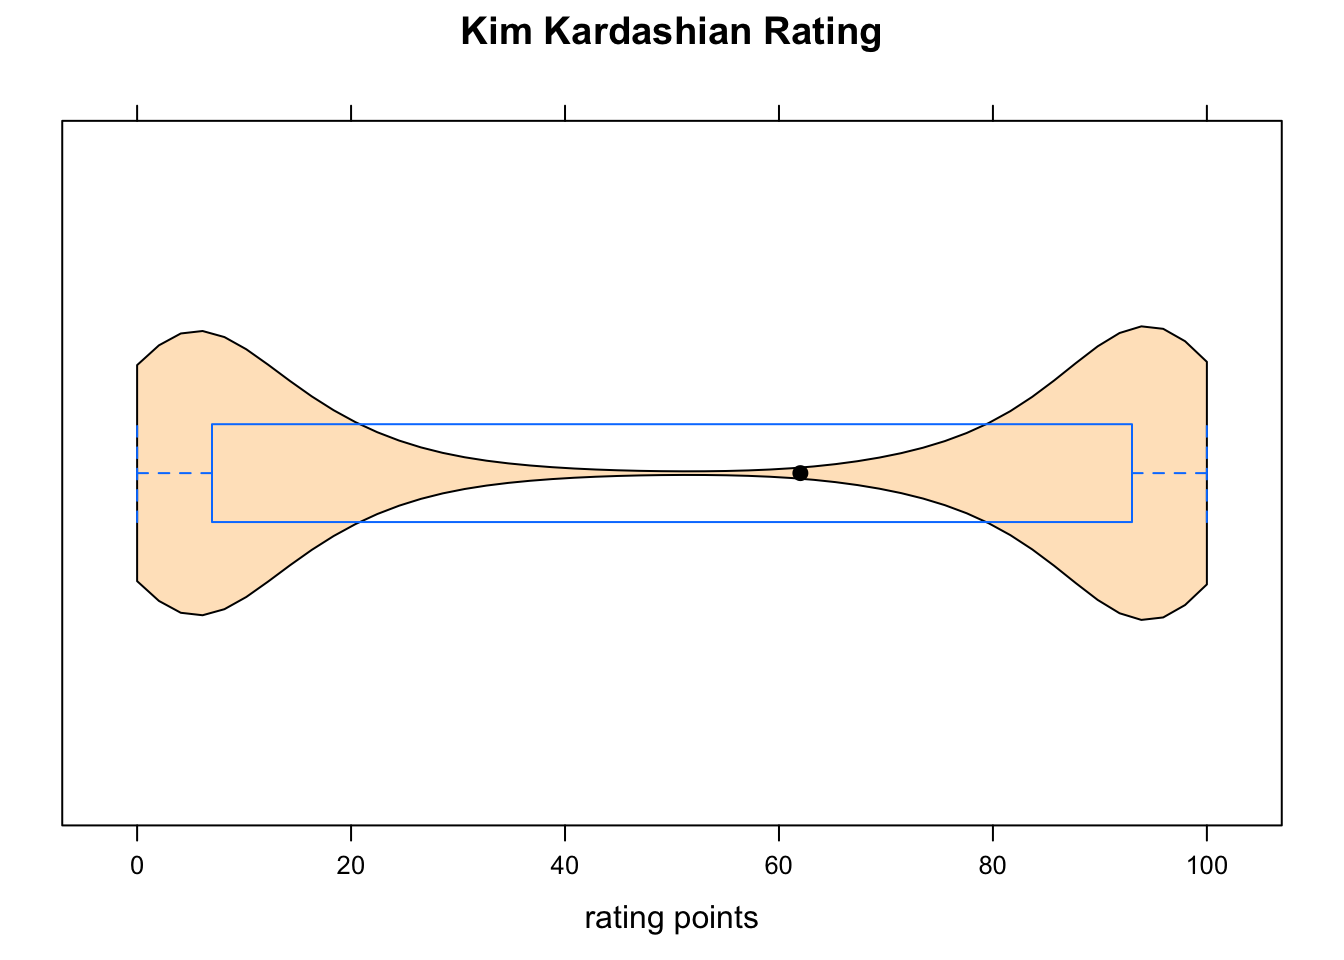 Kardashian Violin.  The violin plot supplements the boxplot, indicating that the data are clumped around 0 and around 100, and are quite sparse in the middle.